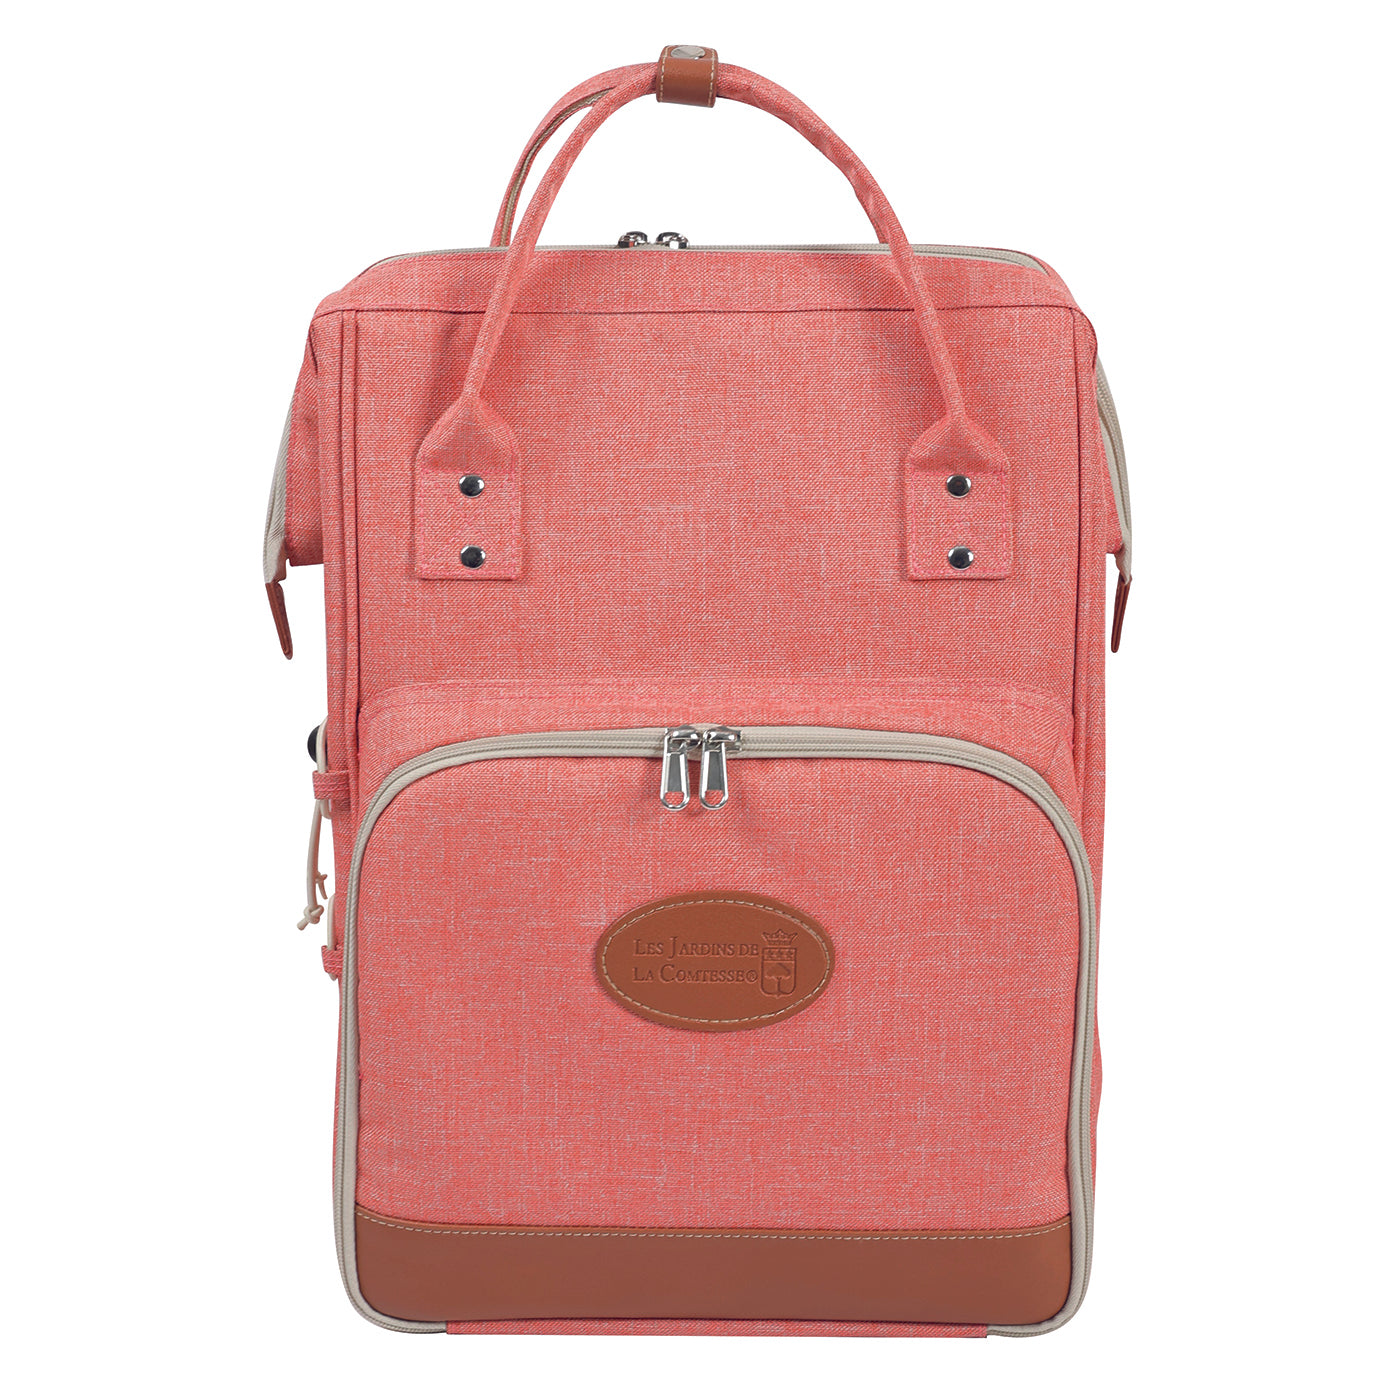 Picnic backpack "Escapade" Pink - 2 persons